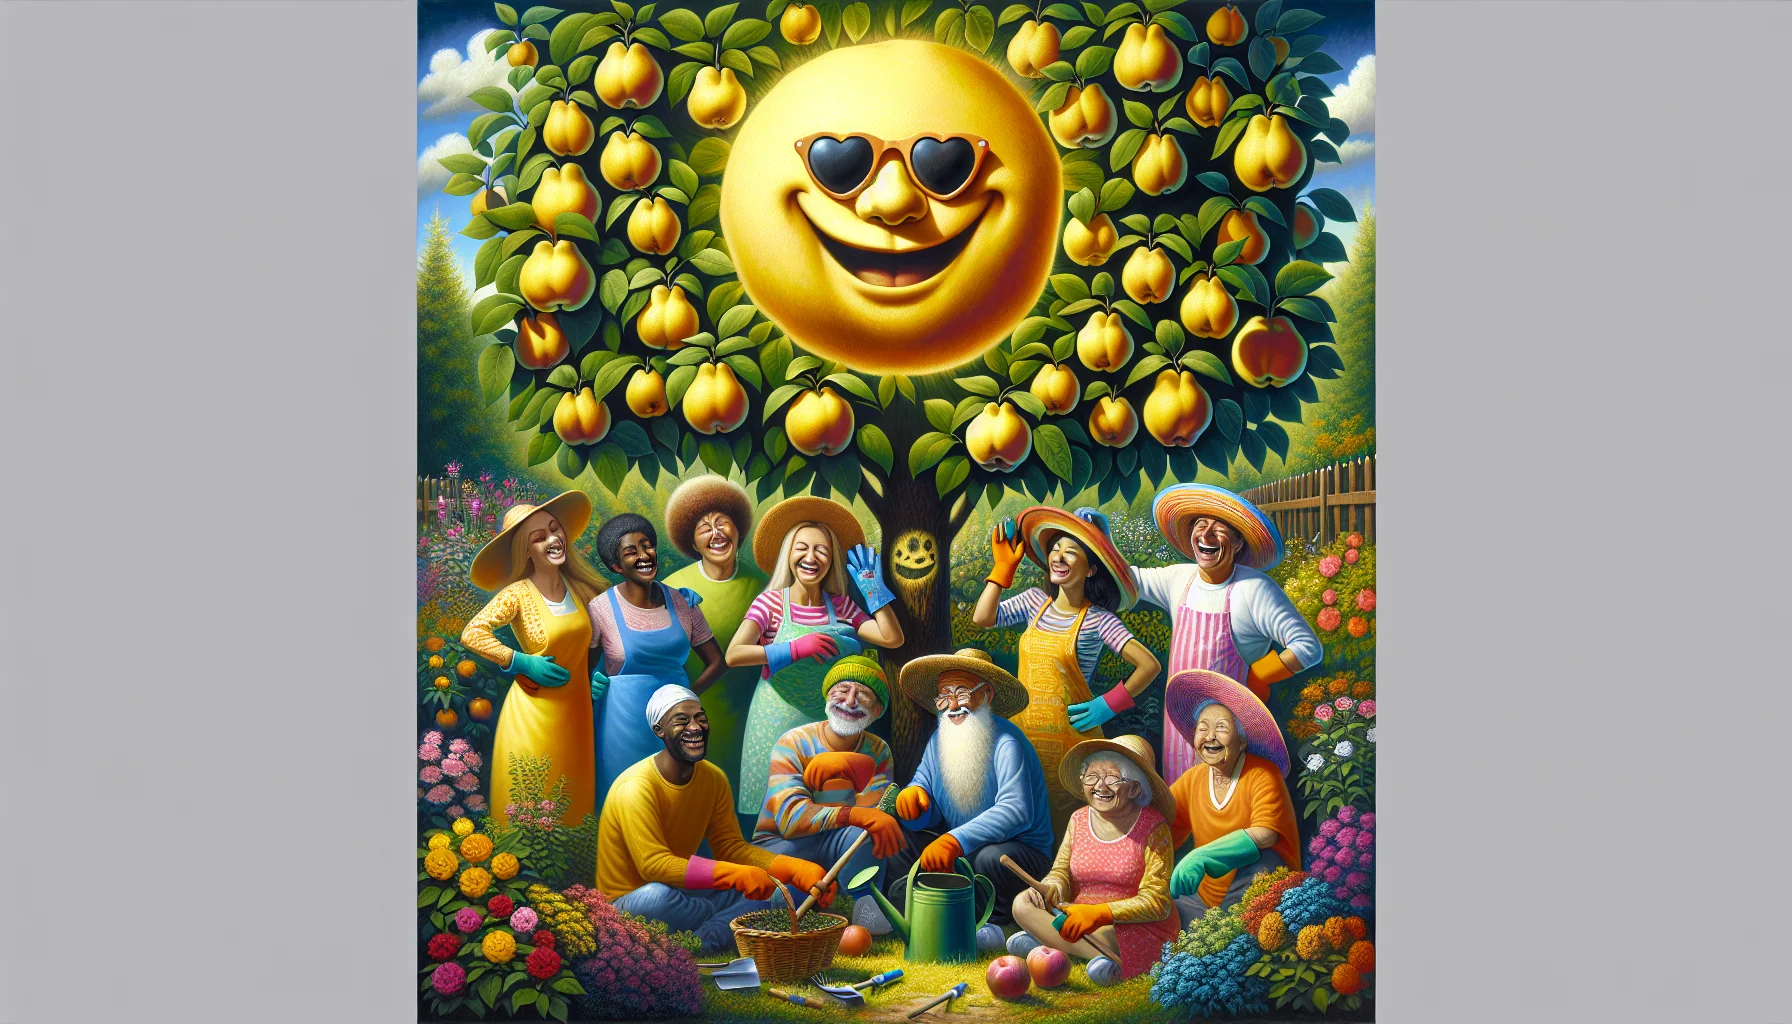 Create an image of a large quince tree with ripe, golden fruits, set under a brilliant sun that's depicted in a humorous way, perhaps with a large smiling face or cartoonish sunglasses. Underneath the tree, paint a diverse group of people - a Caucasian woman, a Black man, a Hispanic child, a Middle-Eastern elderly man, and a South Asian woman - all wearing colourful gardening attires, gloves, and sun hats. They are thoroughly enjoying gardening, chuckling over a joke, and urging others to participate in their joy of nurturing plants. Their vibrant garden is filled with various flowering plants, vegetables and herbs, showing the satisfaction one can get from gardening.